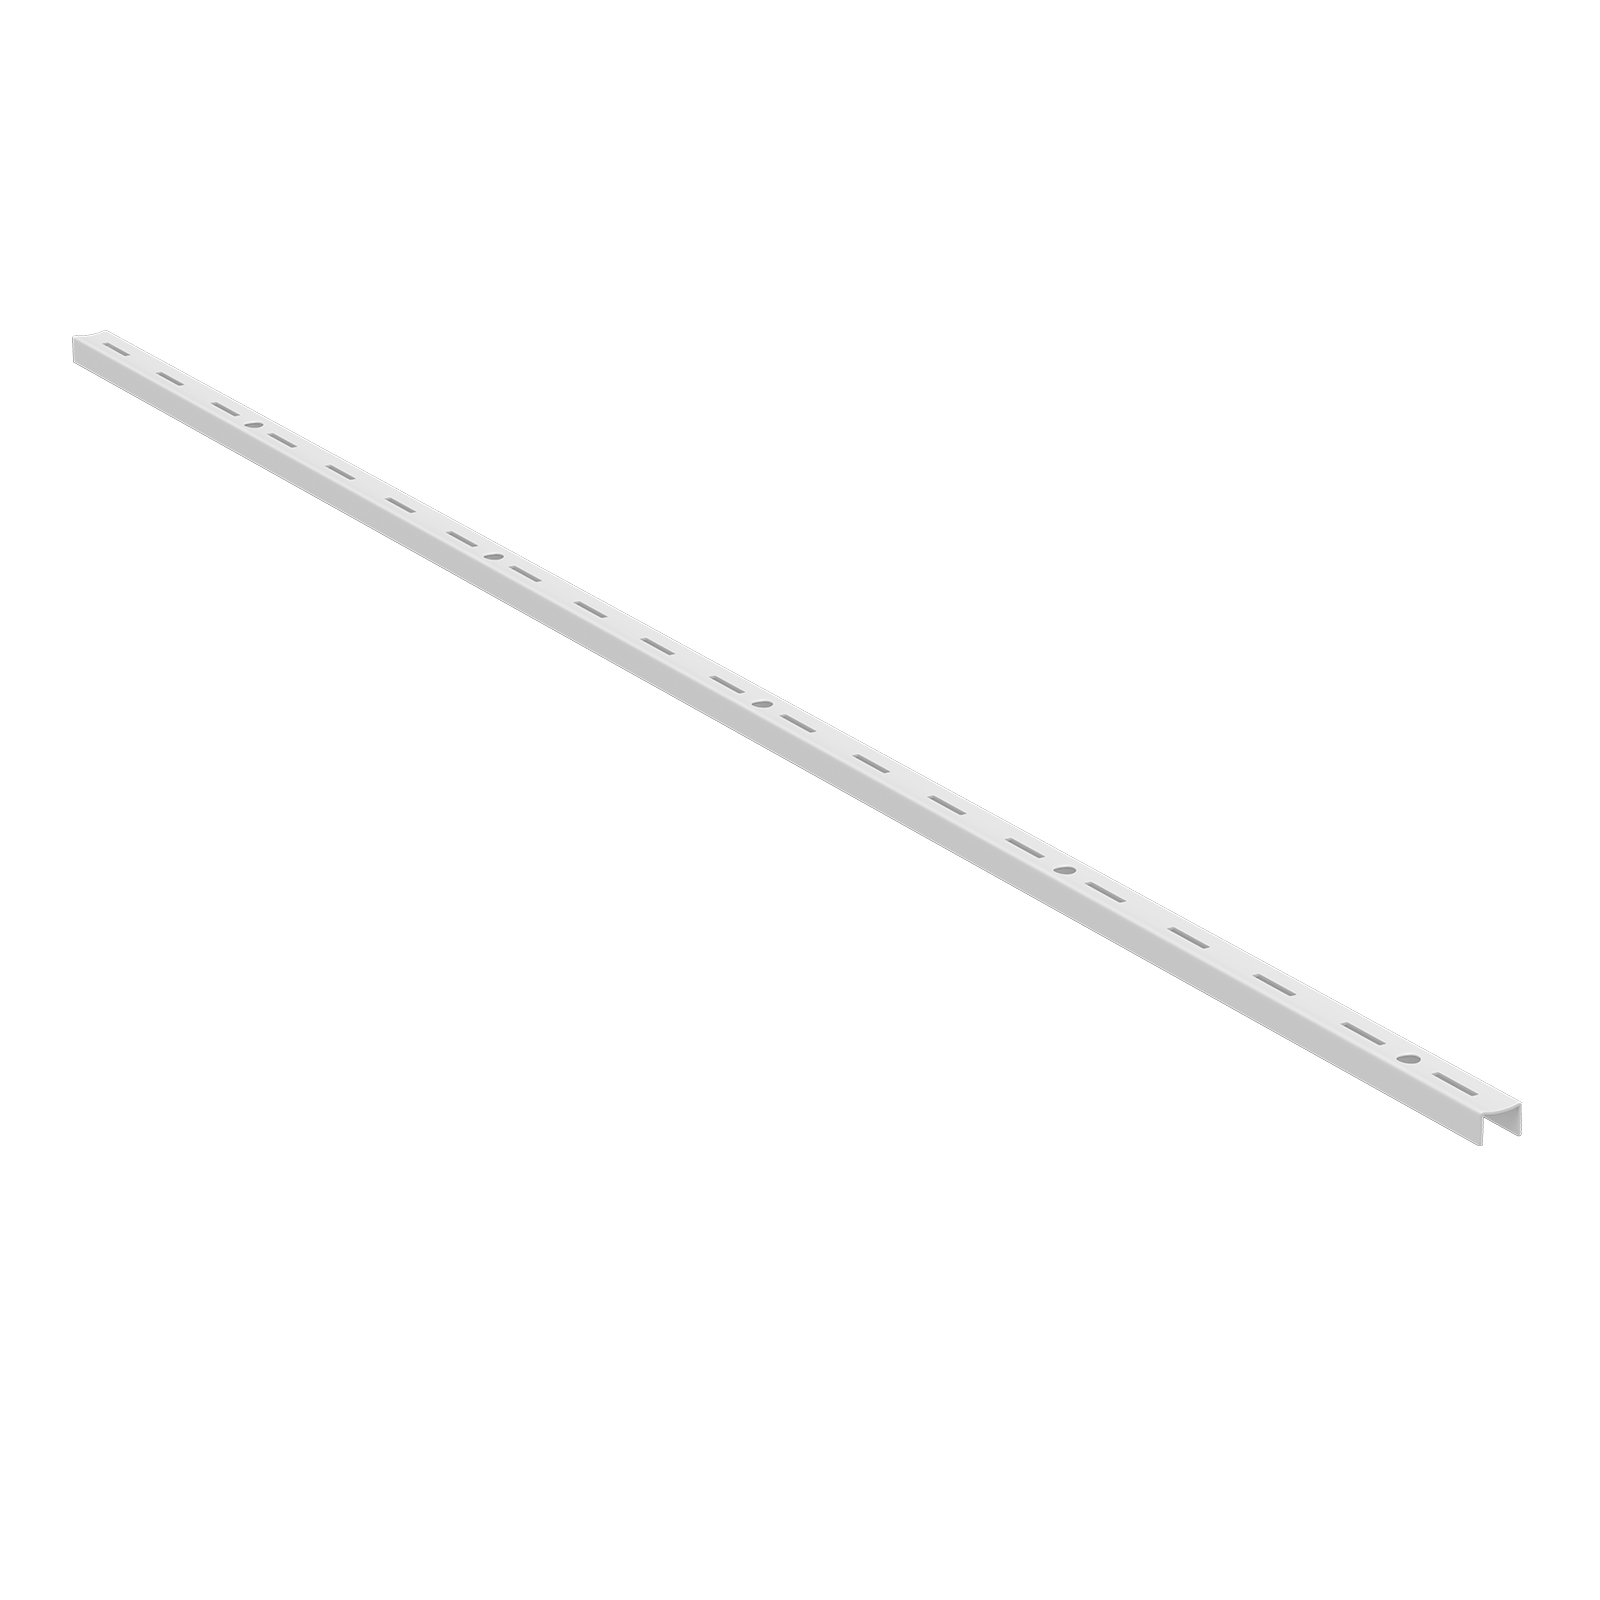 Home Solutions Single Slot Wall Strip White 1000mm